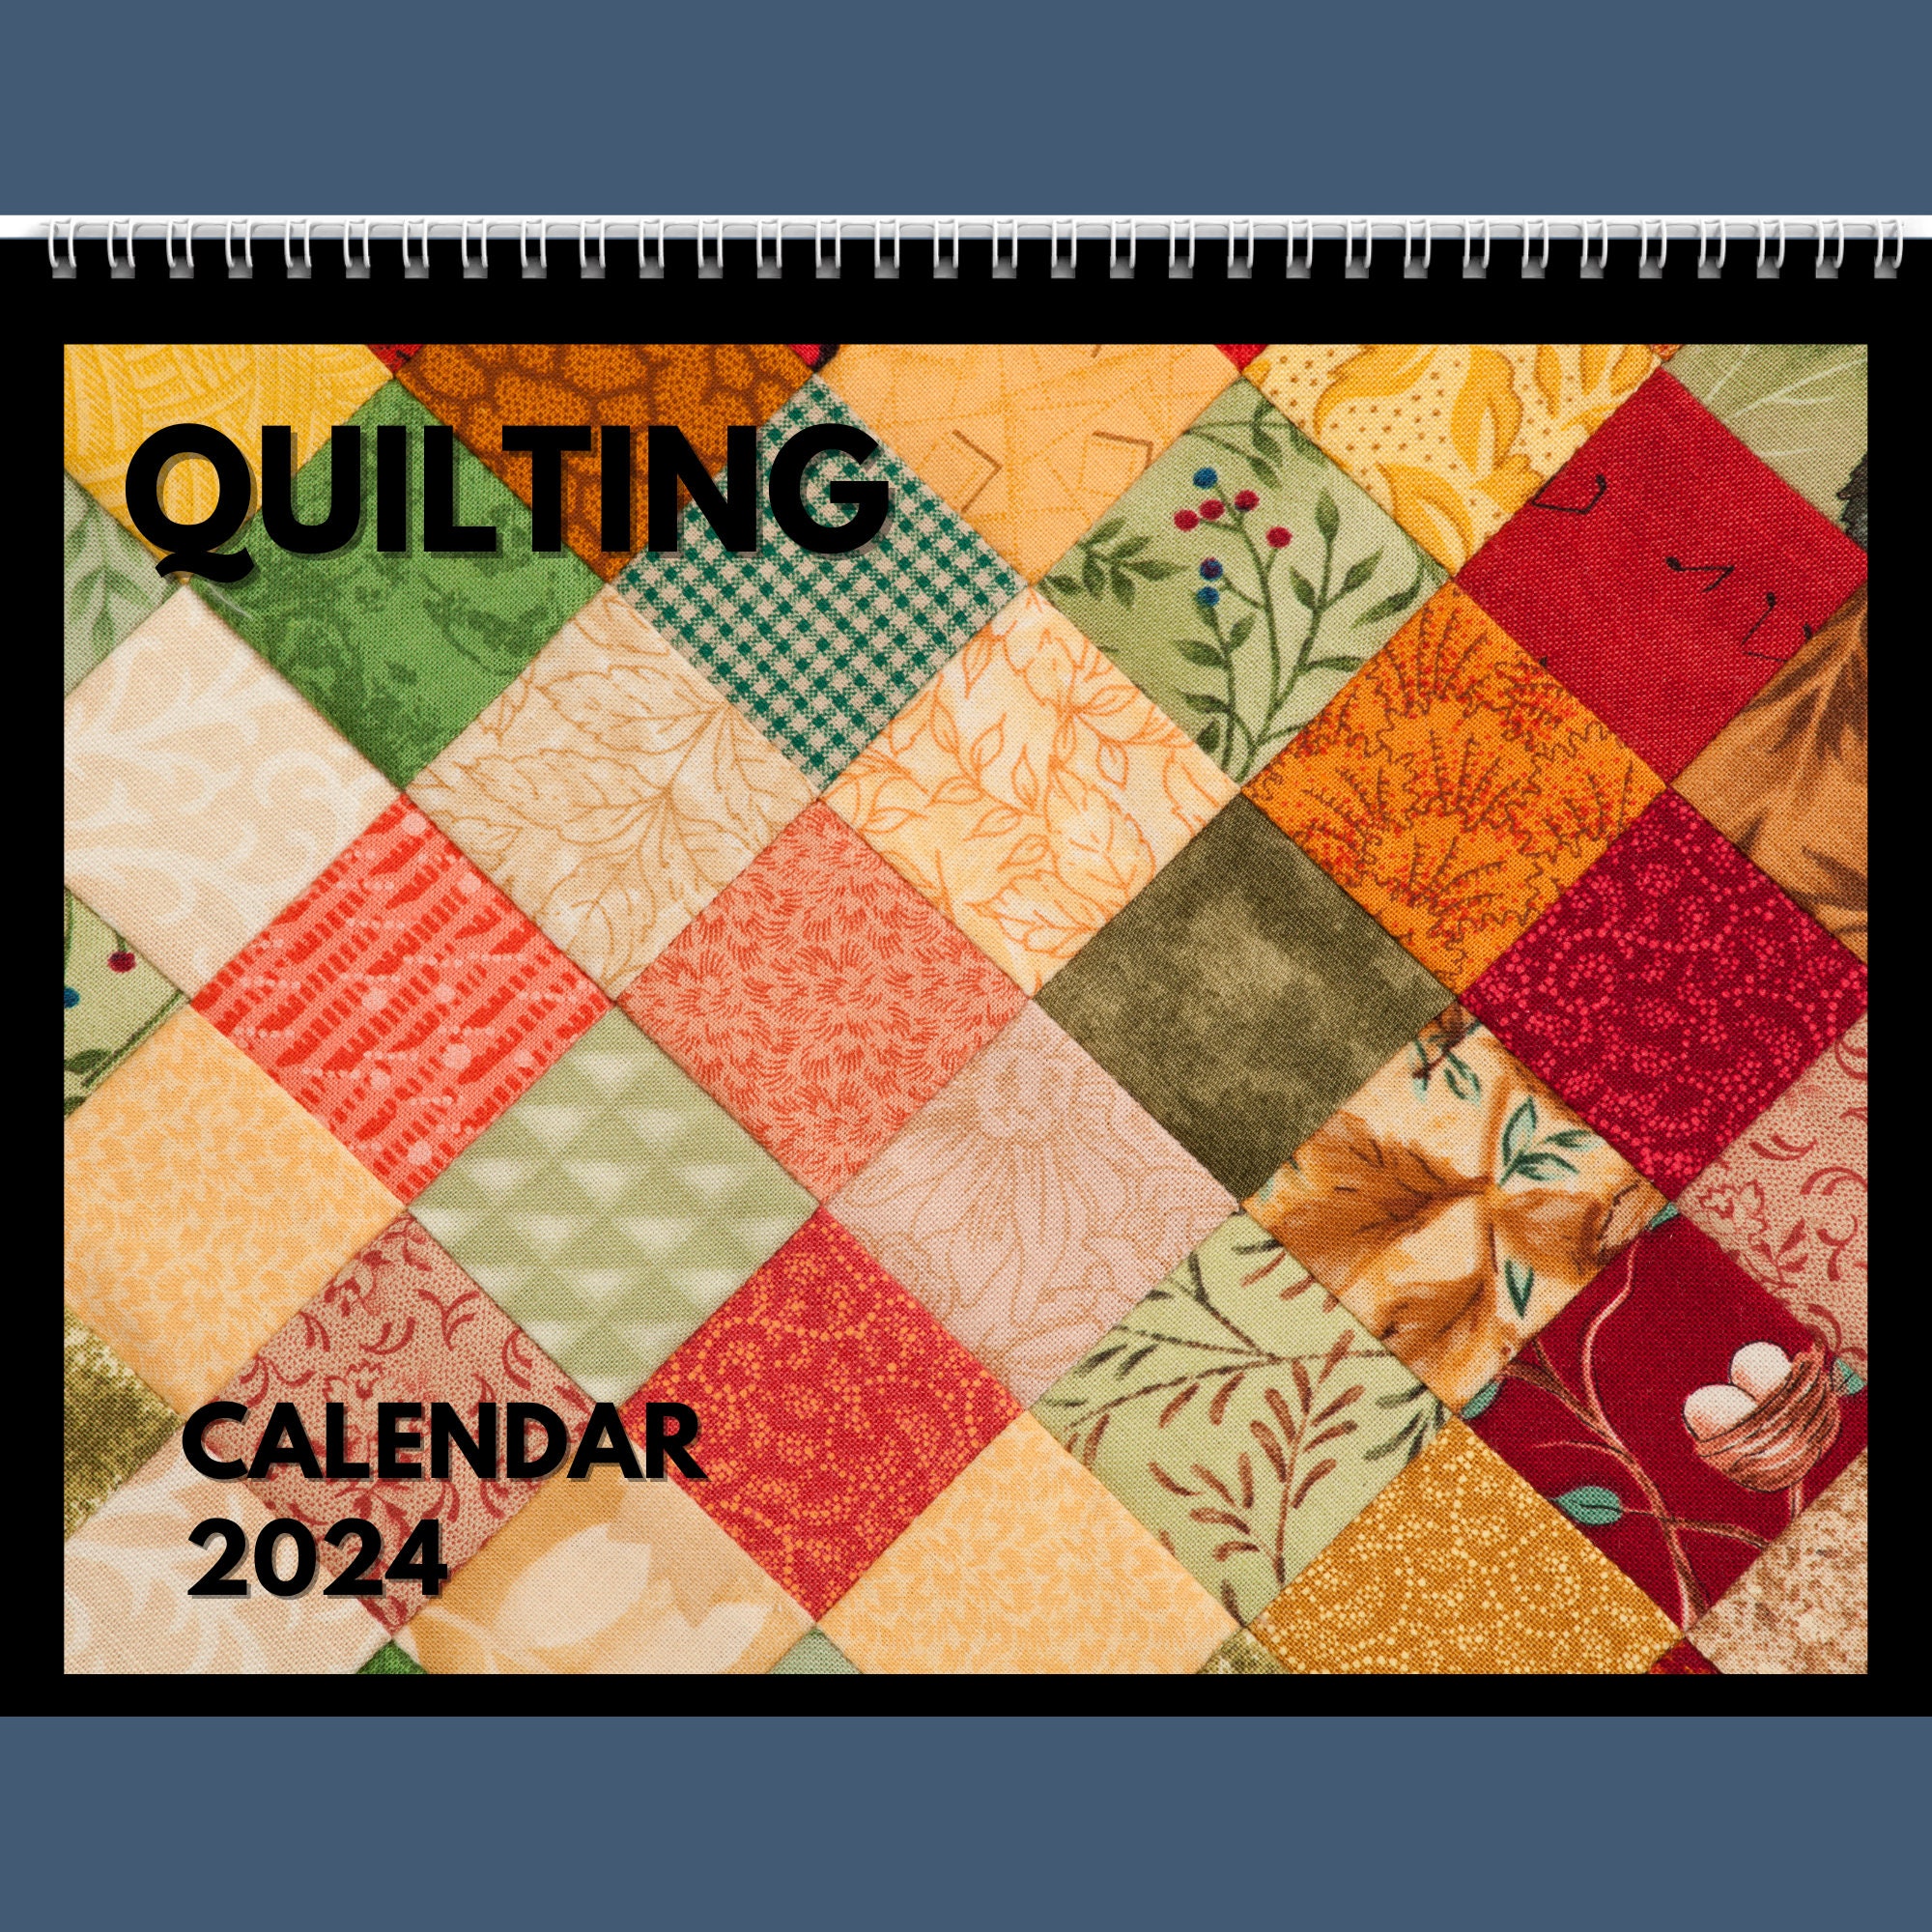 The Best Gifts for Quilters - Treeline Quilting